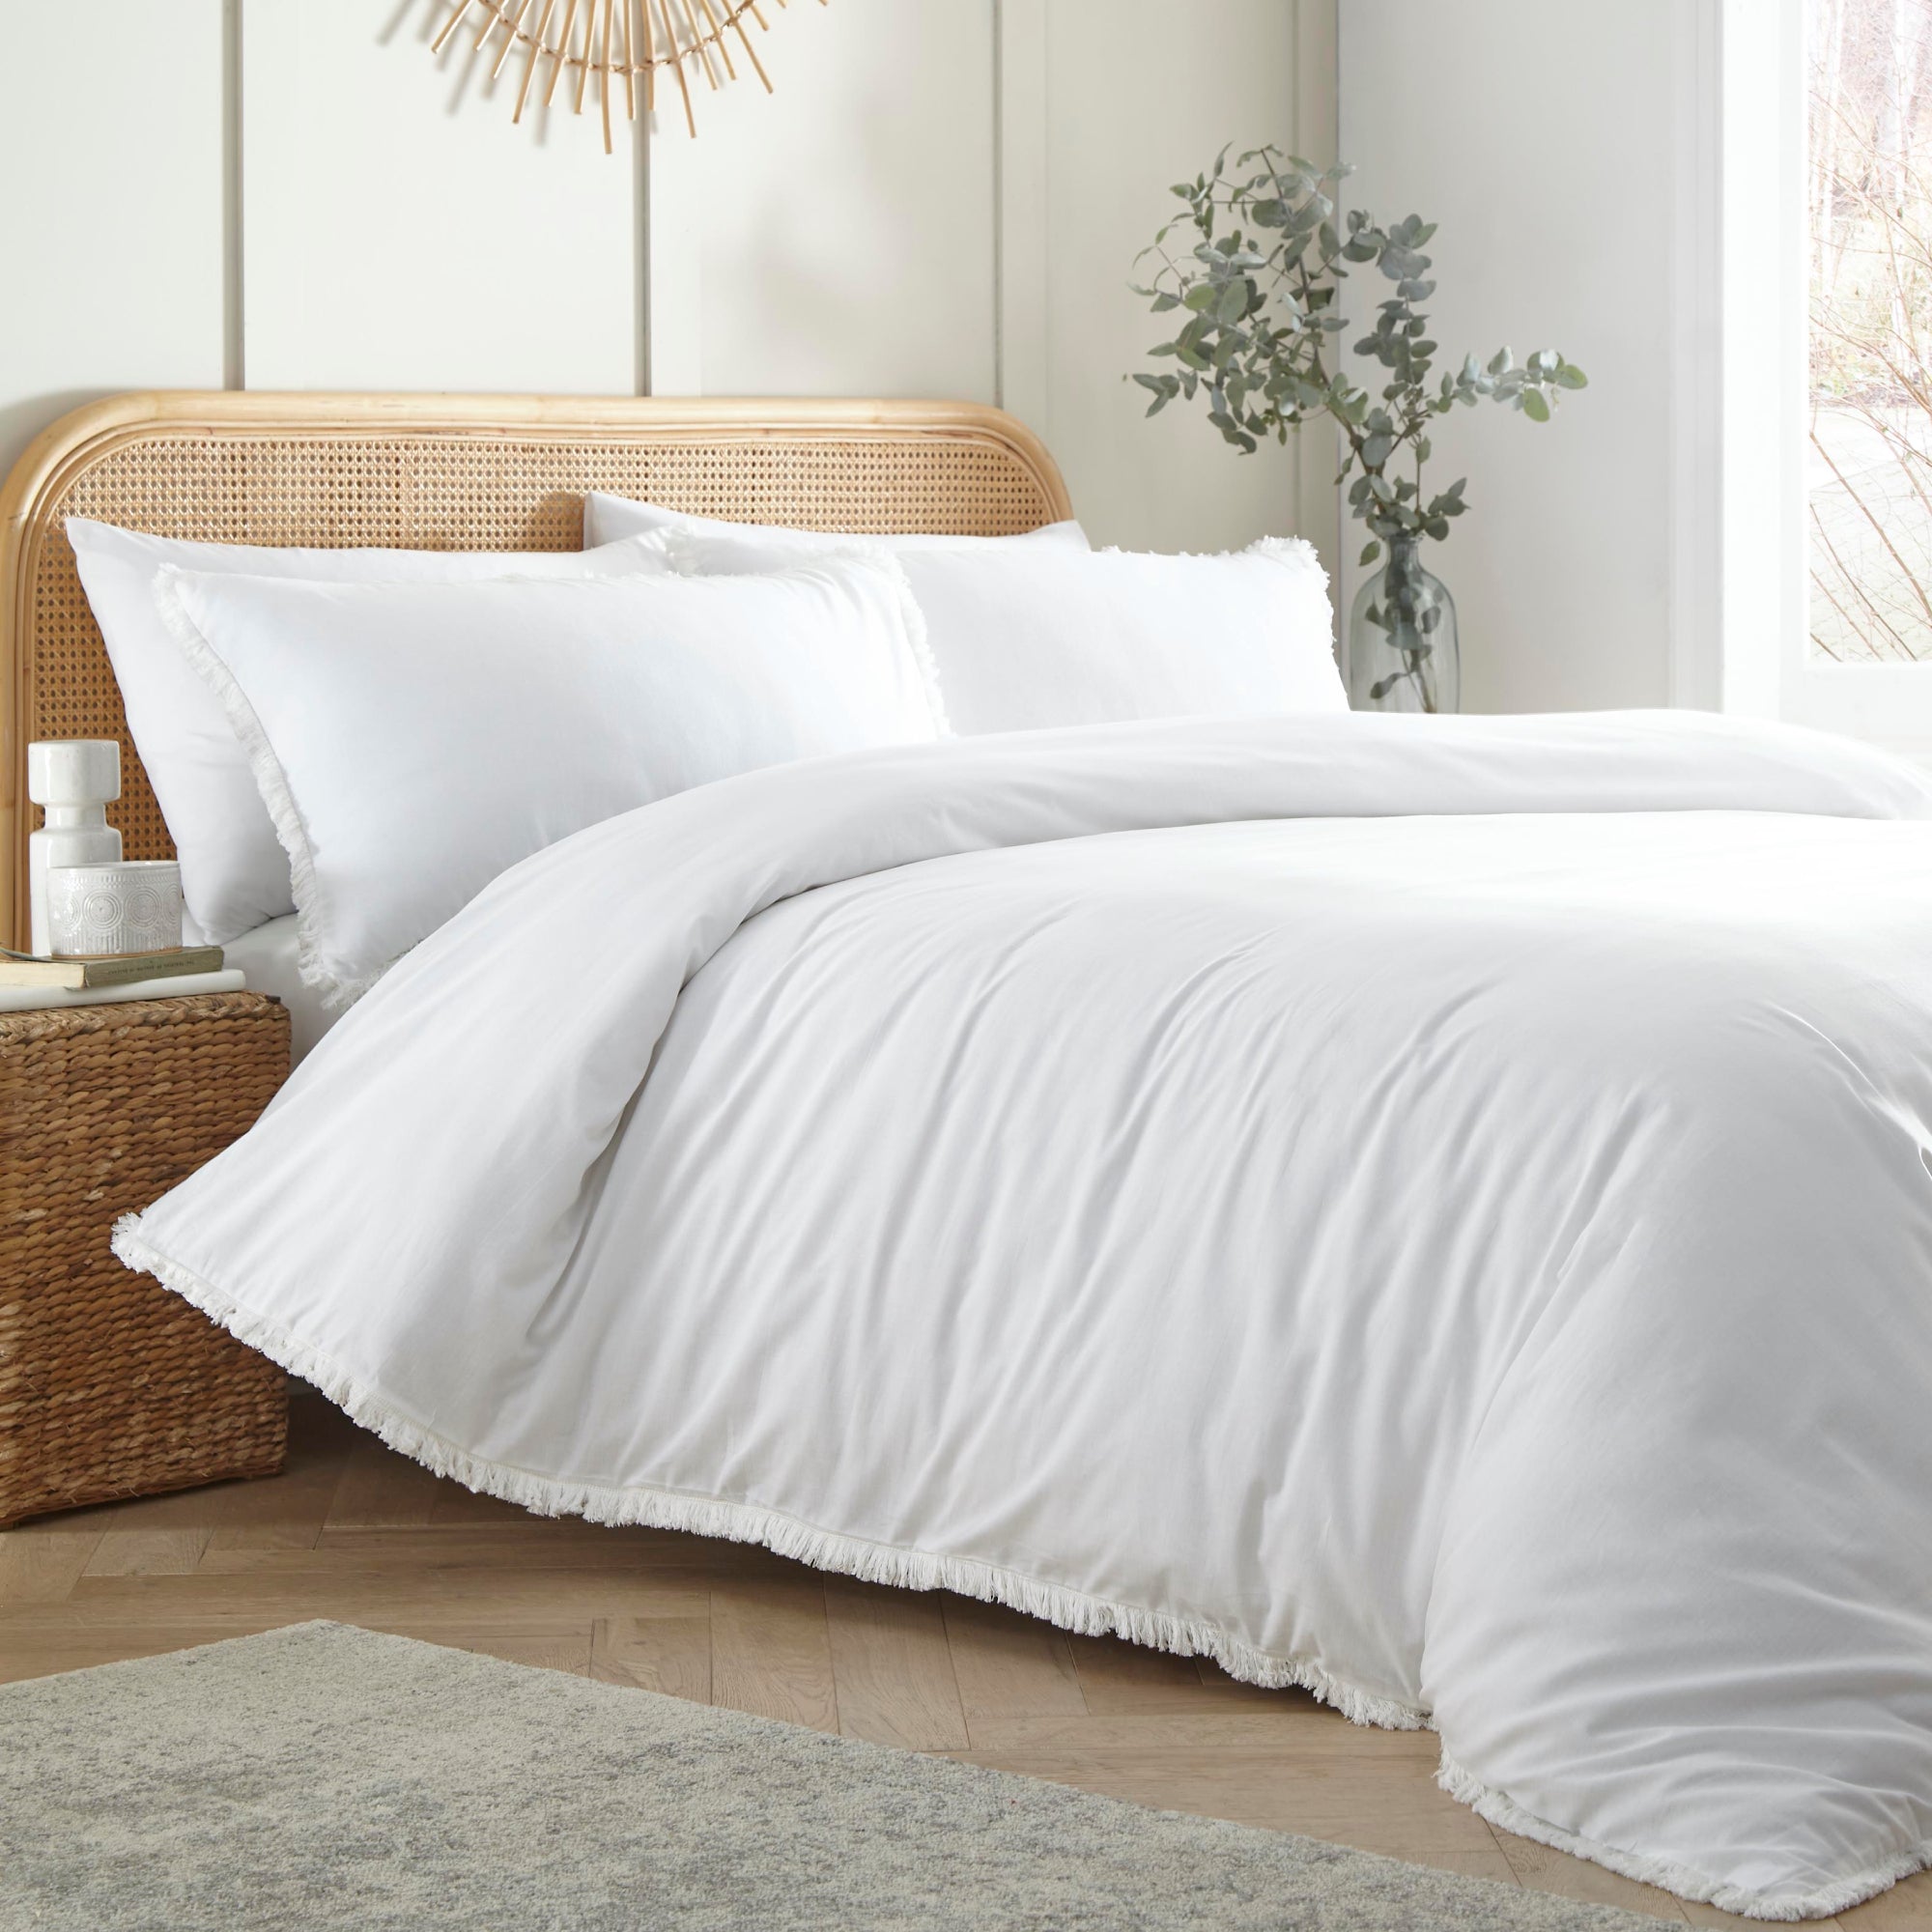 Duvet Cover Set Claire by Appletree Loft in White